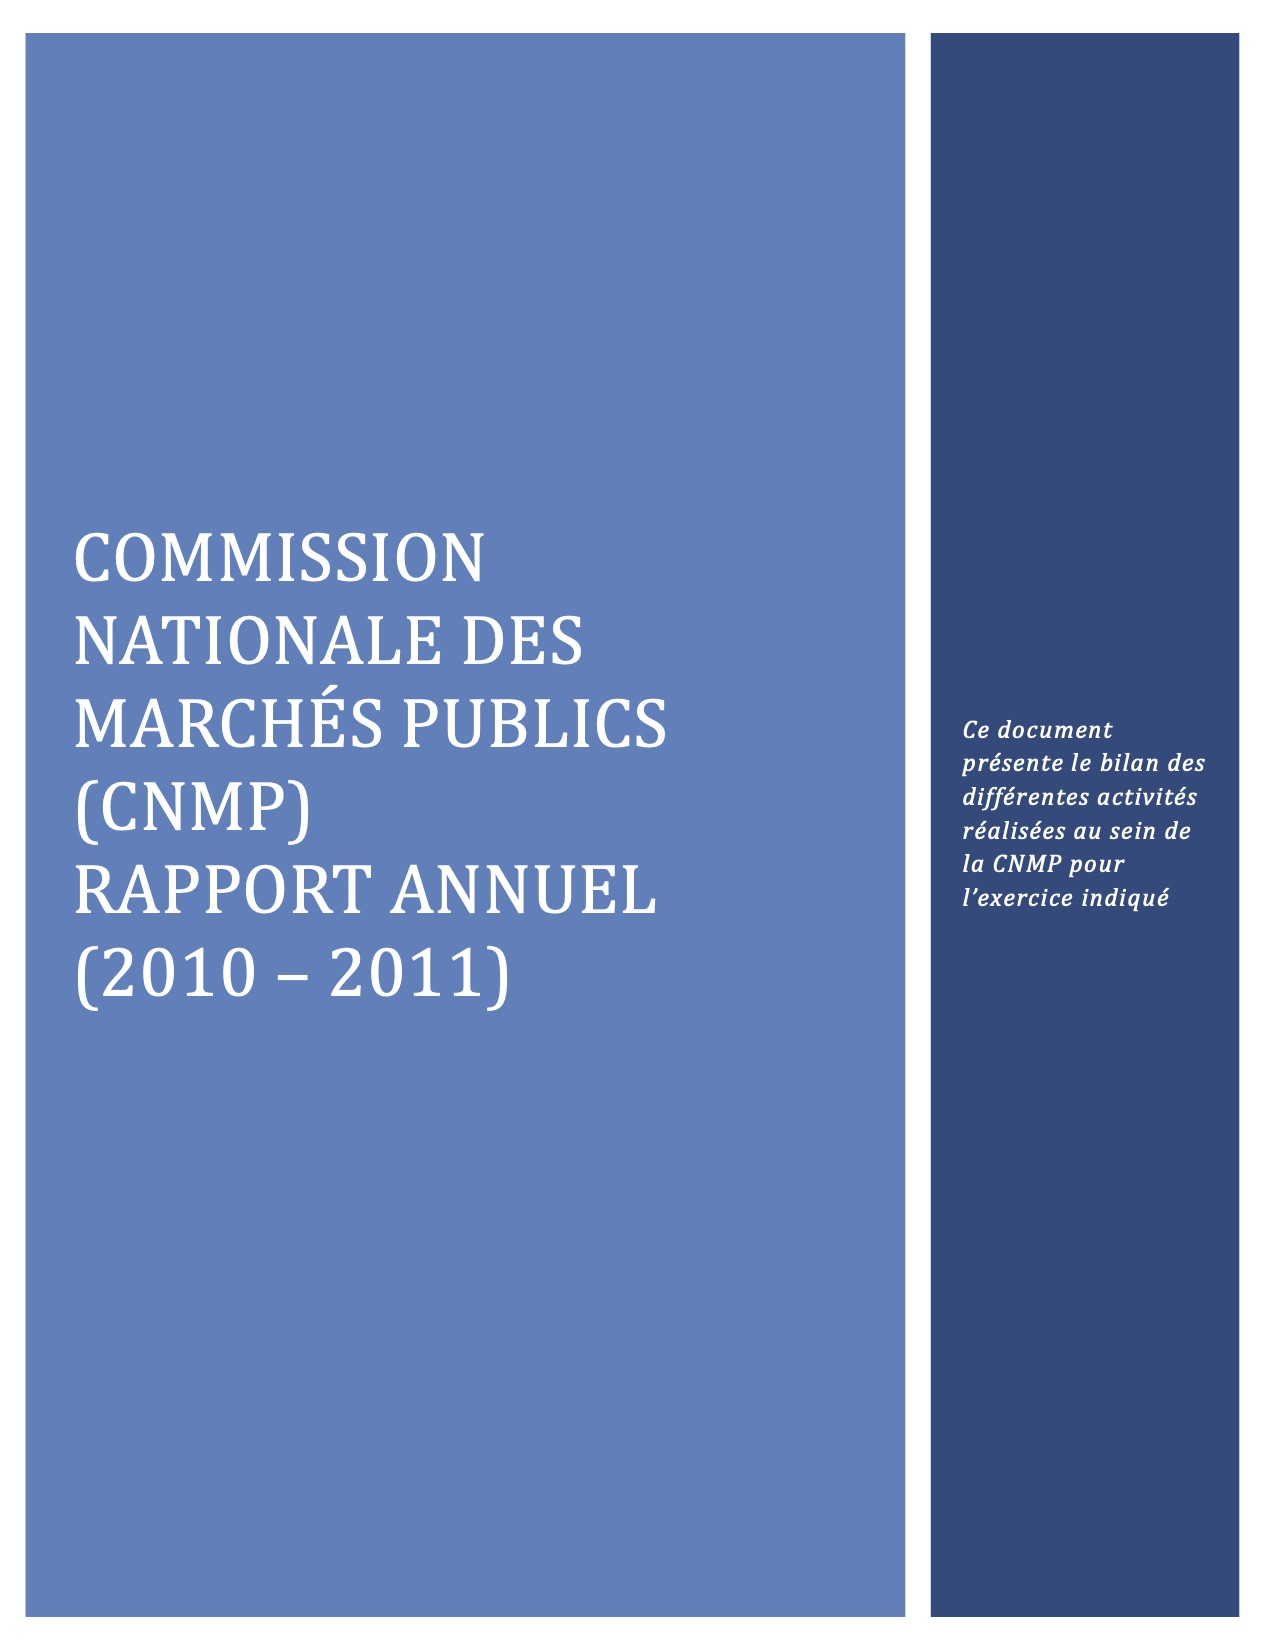 Rapport annuel 2010-2011